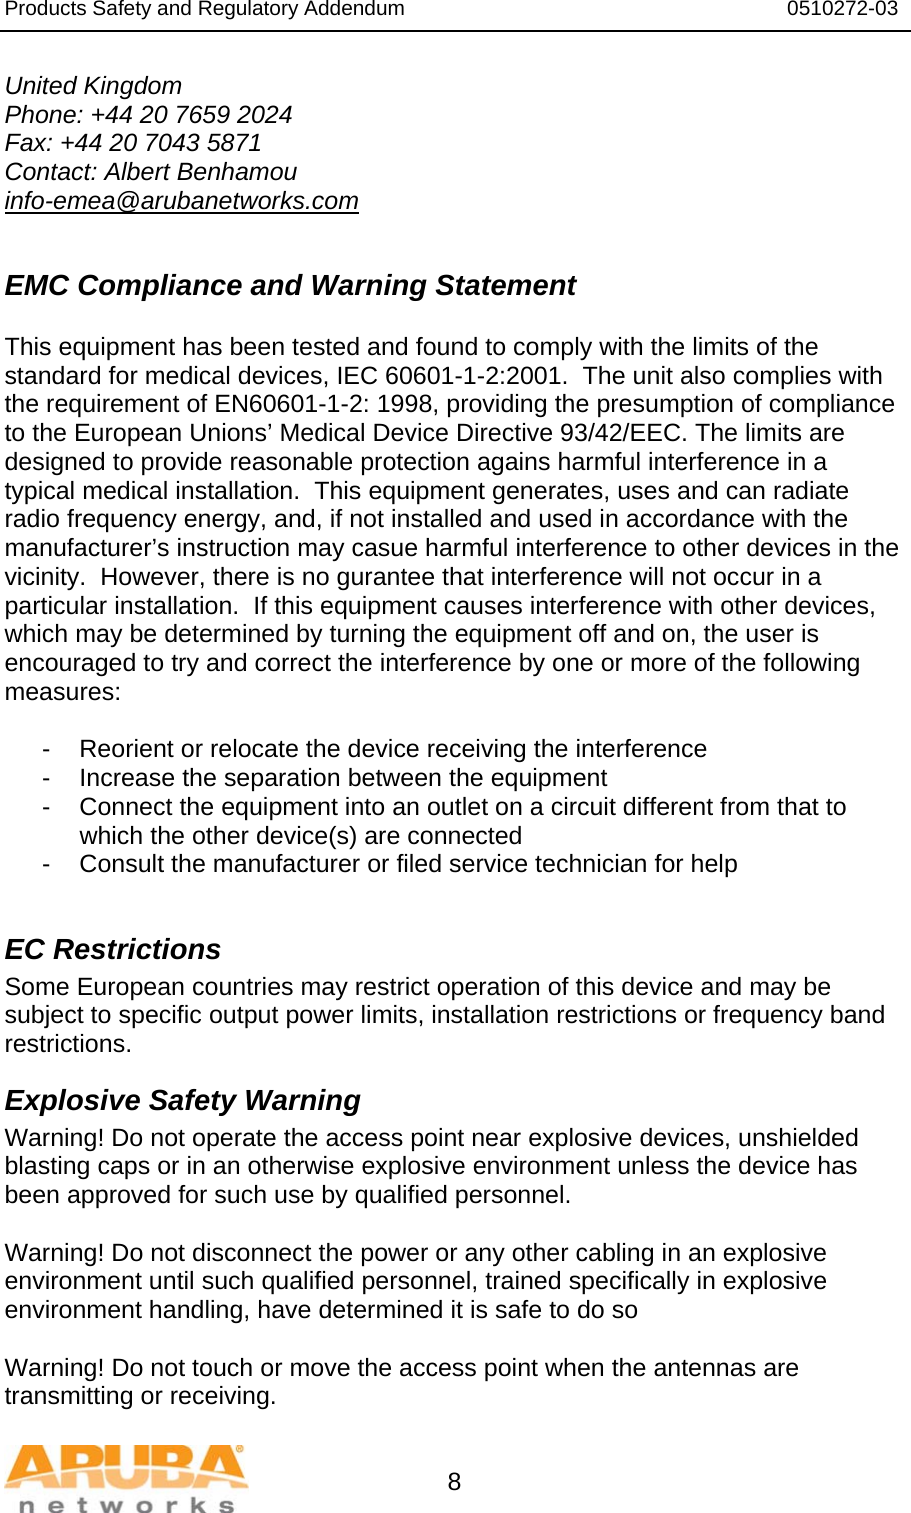 Products Safety and Regulatory Addendum                                                                  0510272-03   8 United Kingdom Phone: +44 20 7659 2024 Fax: +44 20 7043 5871 Contact: Albert Benhamou info-emea@arubanetworks.com  EMC Compliance and Warning Statement  This equipment has been tested and found to comply with the limits of the standard for medical devices, IEC 60601-1-2:2001.  The unit also complies with the requirement of EN60601-1-2: 1998, providing the presumption of compliance to the European Unions’ Medical Device Directive 93/42/EEC. The limits are designed to provide reasonable protection agains harmful interference in a typical medical installation.  This equipment generates, uses and can radiate radio frequency energy, and, if not installed and used in accordance with the manufacturer’s instruction may casue harmful interference to other devices in the vicinity.  However, there is no gurantee that interference will not occur in a particular installation.  If this equipment causes interference with other devices, which may be determined by turning the equipment off and on, the user is encouraged to try and correct the interference by one or more of the following measures:  -  Reorient or relocate the device receiving the interference -  Increase the separation between the equipment -  Connect the equipment into an outlet on a circuit different from that to which the other device(s) are connected -  Consult the manufacturer or filed service technician for help  EC Restrictions Some European countries may restrict operation of this device and may be subject to specific output power limits, installation restrictions or frequency band restrictions. Explosive Safety Warning Warning! Do not operate the access point near explosive devices, unshielded blasting caps or in an otherwise explosive environment unless the device has been approved for such use by qualified personnel.  Warning! Do not disconnect the power or any other cabling in an explosive environment until such qualified personnel, trained specifically in explosive environment handling, have determined it is safe to do so  Warning! Do not touch or move the access point when the antennas are transmitting or receiving. 